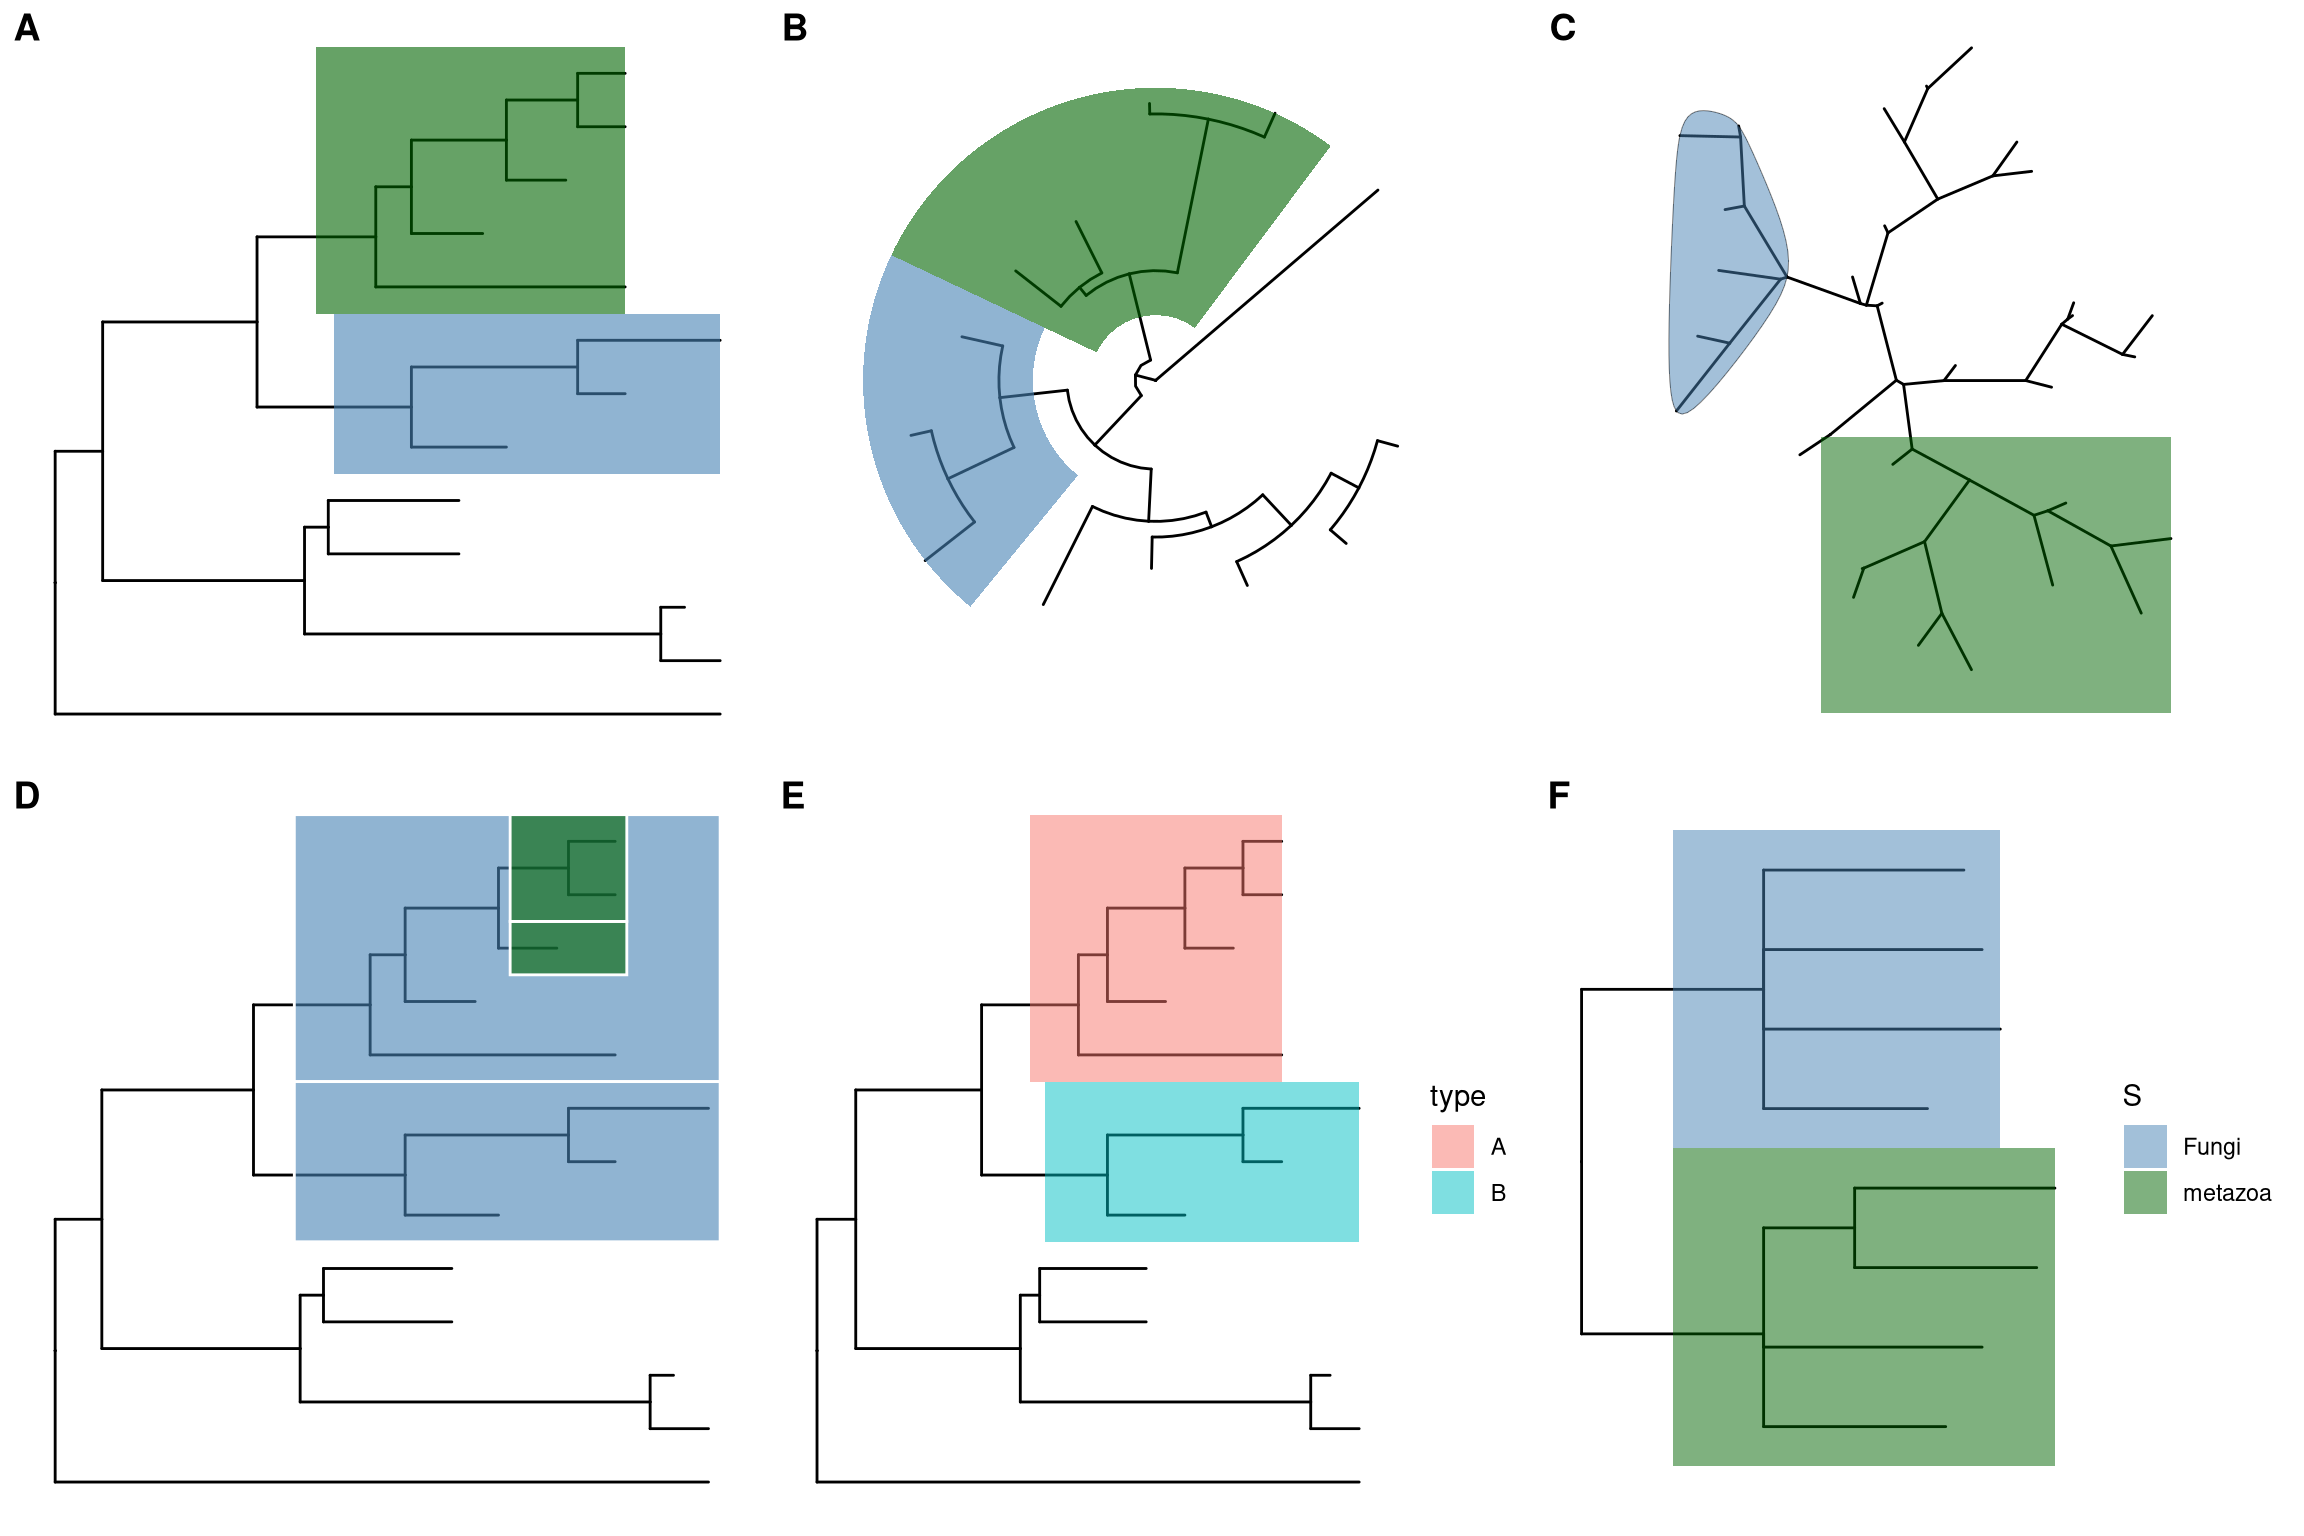 Highlight selected clades. Rectangular layout (A), circular/fan (B) and unrooted layouts. Highlight neighboring subclades simultaneously (D). Highlight selected clades using associated data (E and F).